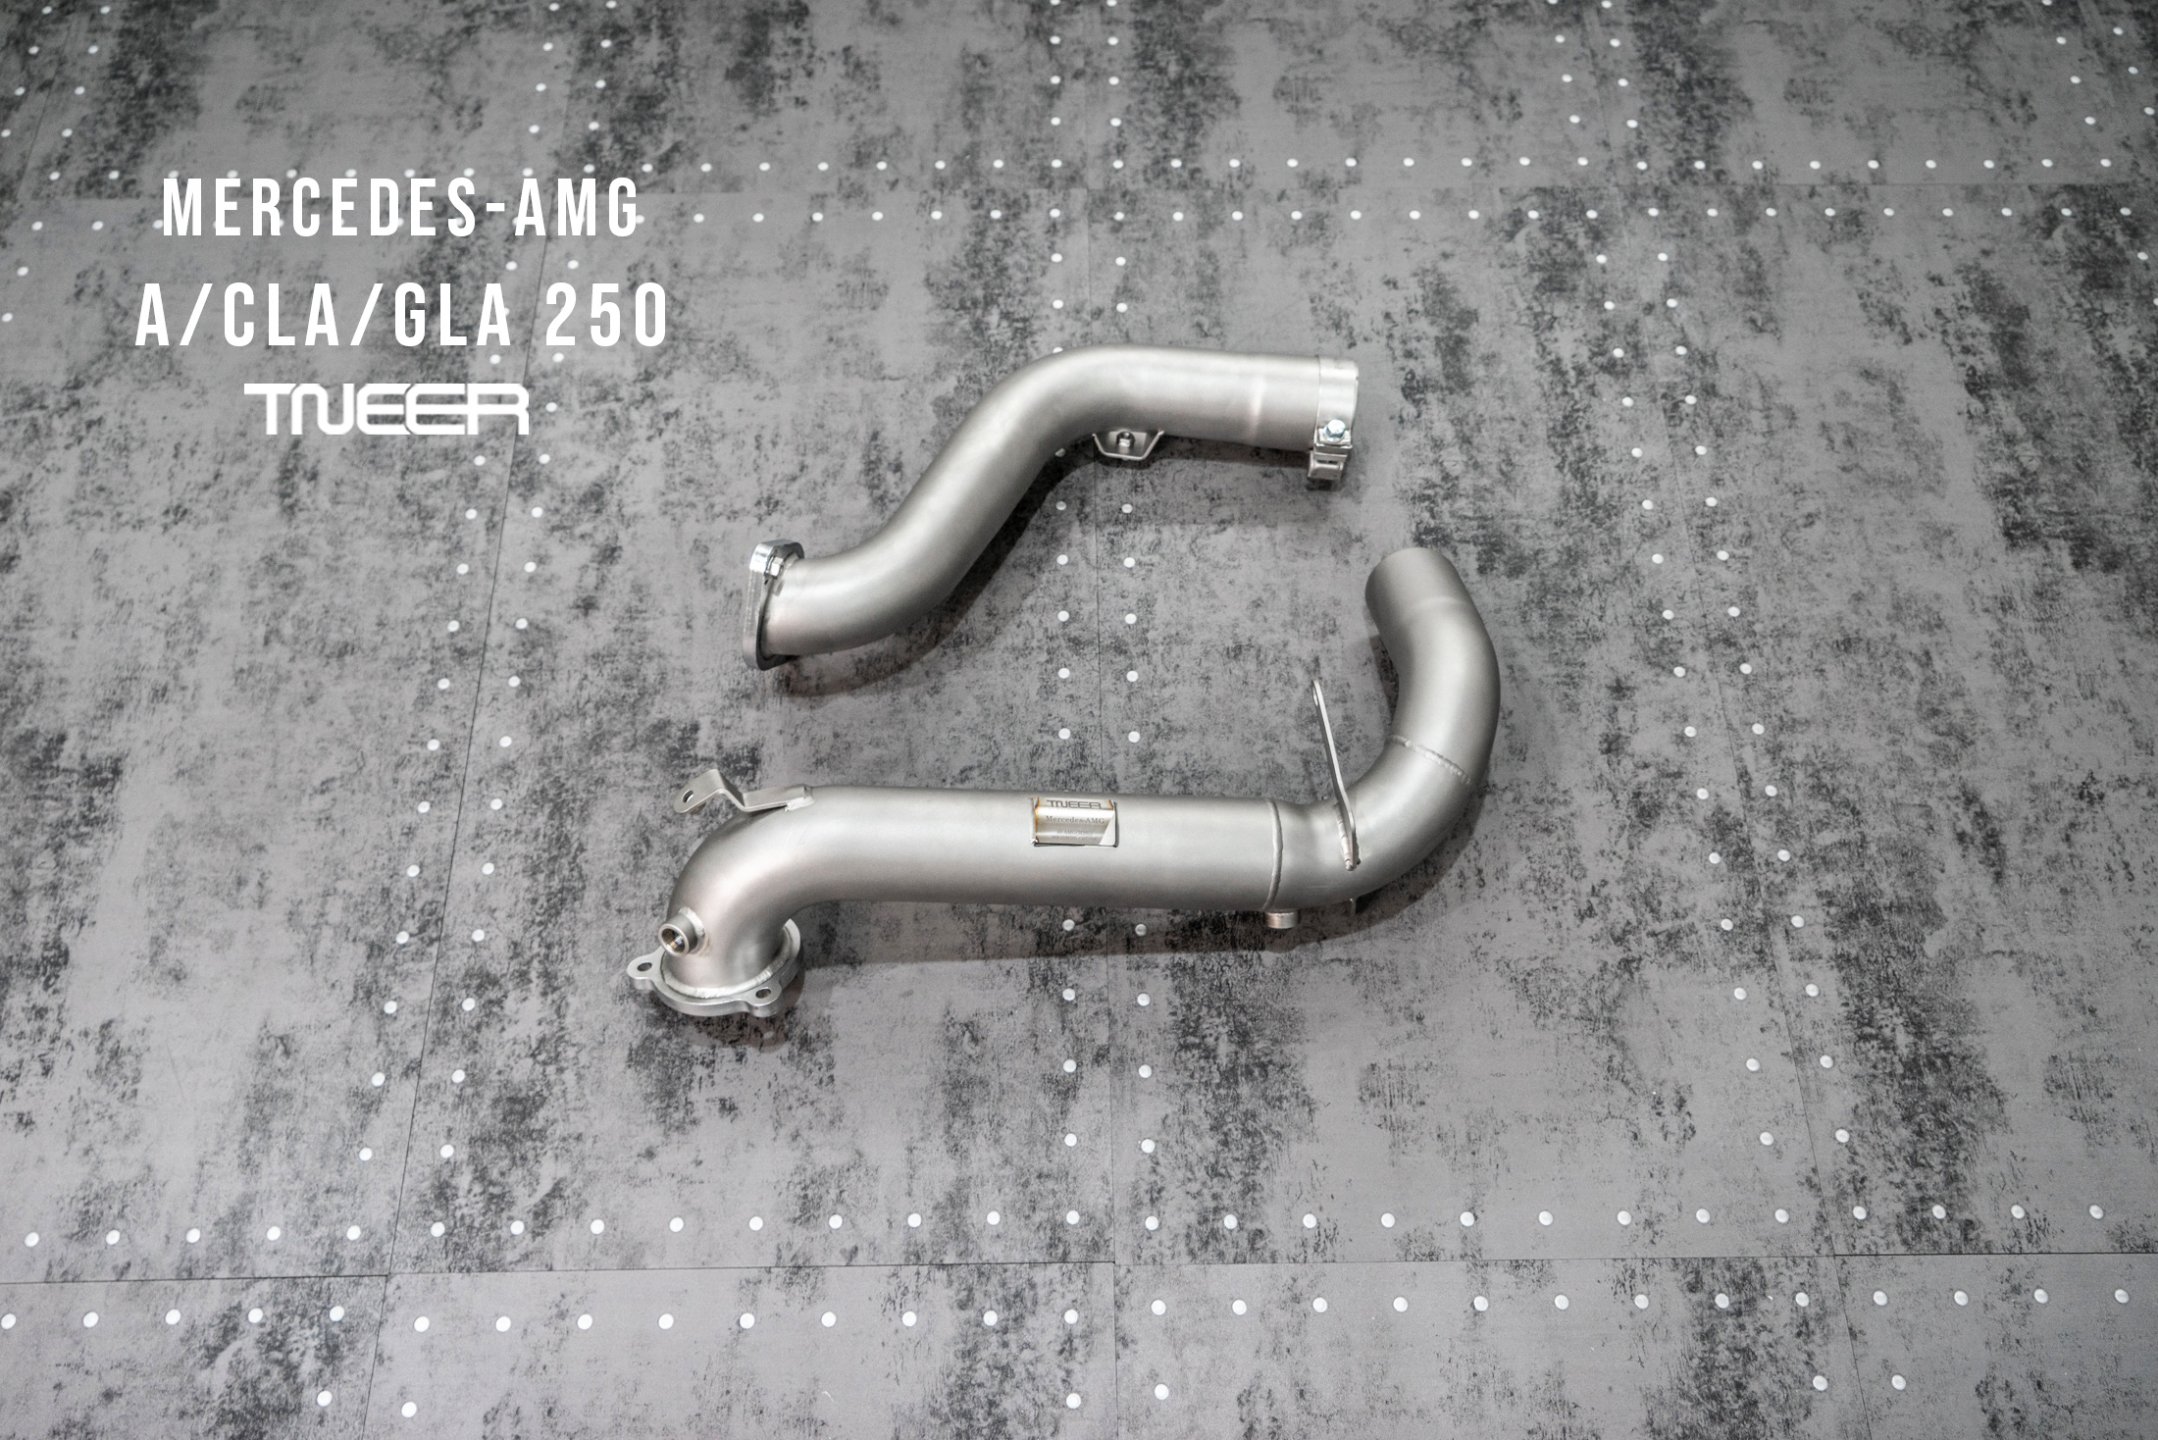 Mercedes-Benz W177 A250 TNEER Downpipes